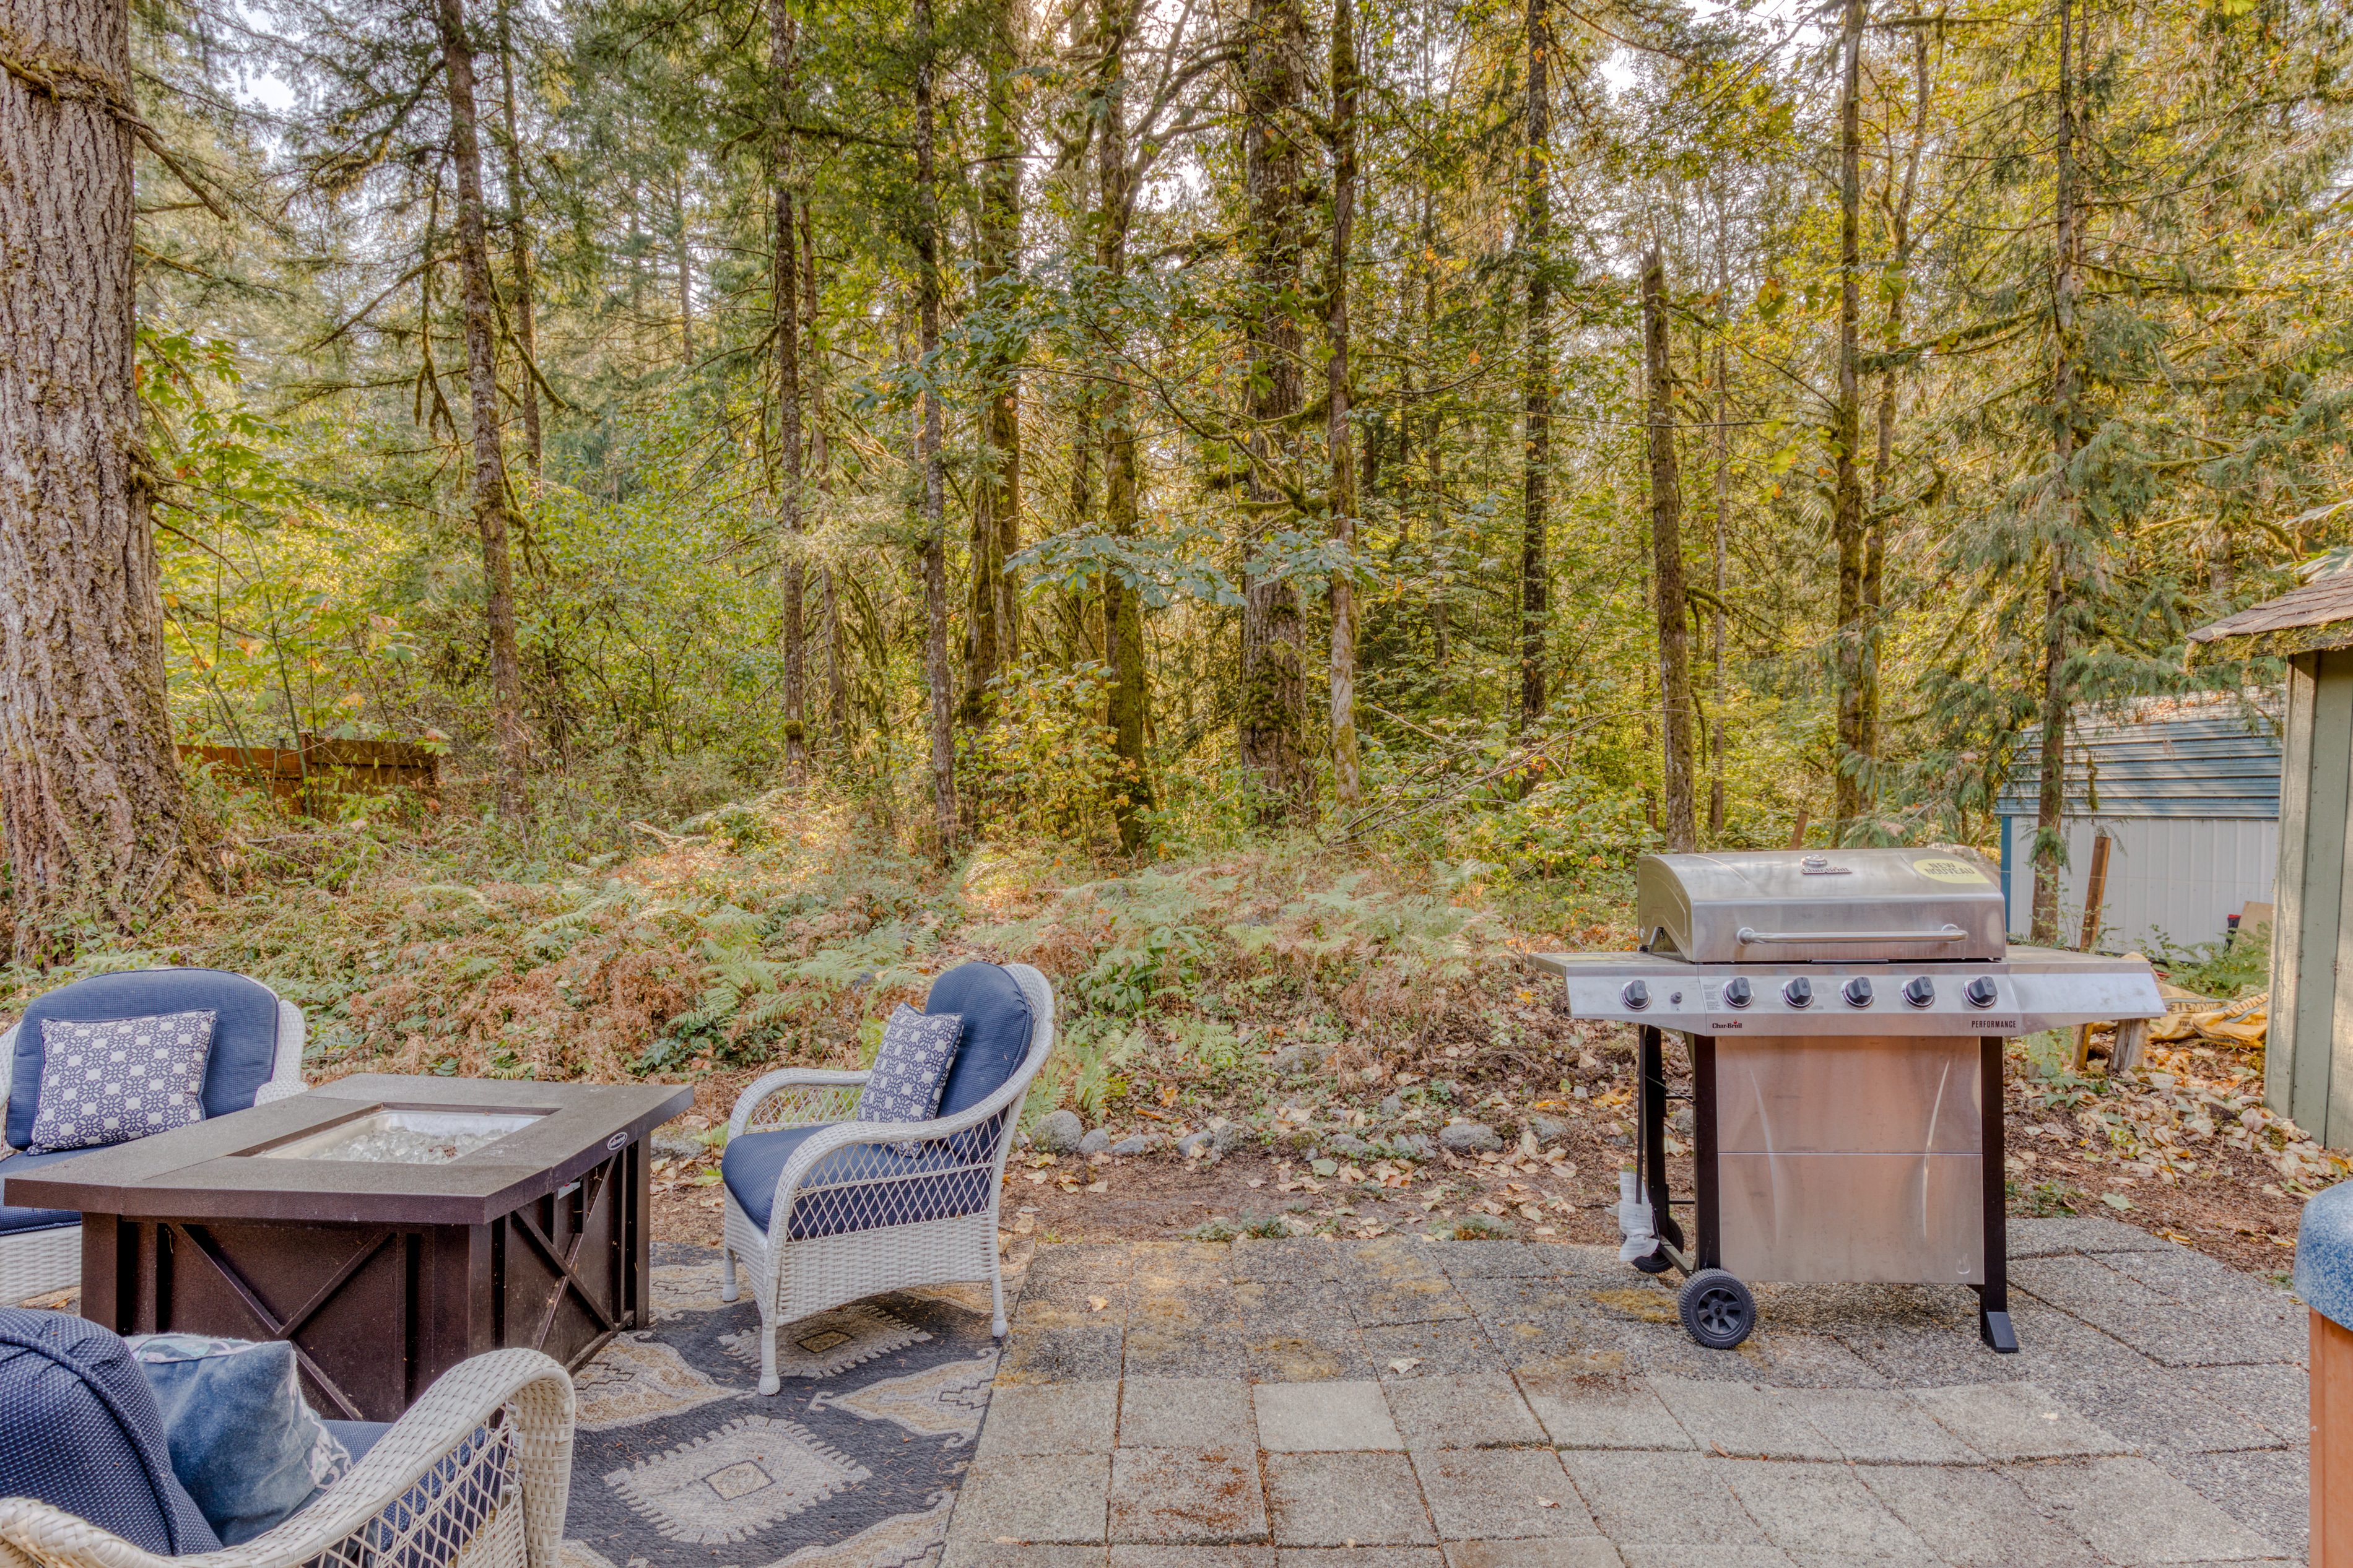 Complete with outdoor seating, a fire pit, and a grill